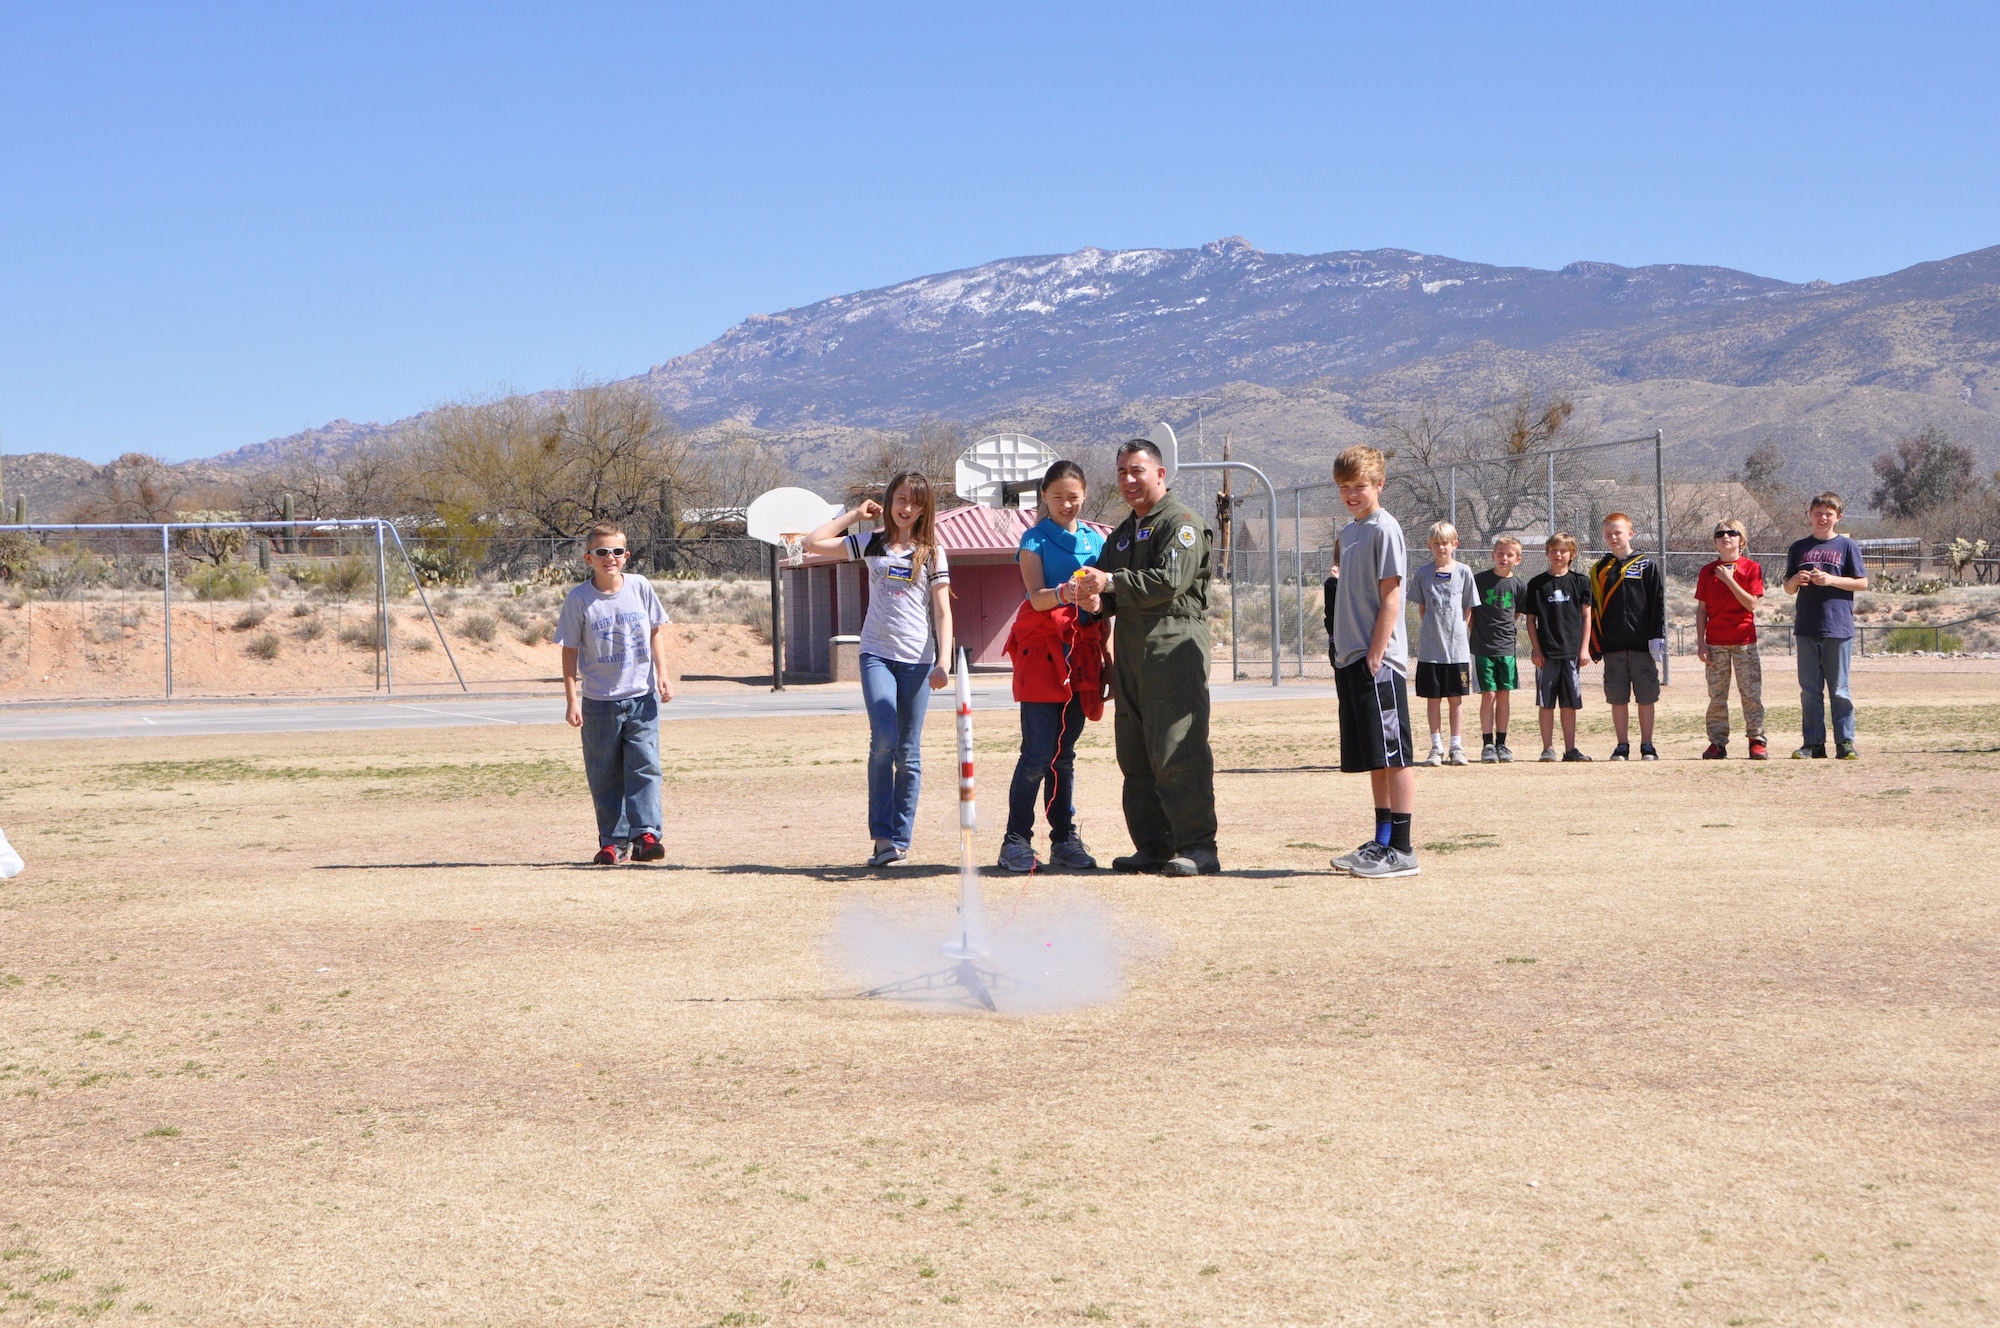 Maj. Andre Benitez, 612th Air and Space Operations Center, shoots off a rocket during a demonstration at Tanque Verde Elementary School in Tucson, Ariz., March 1. Airmen from 12th Air Force (Air Forces Southern) gave 5th grade students a lesson on space operations (launch operations, weather support, launch control centers and the importance of launch observation and recovery) during their visit. (USAF photo by Lt. Col. Dan Jones/Released). 